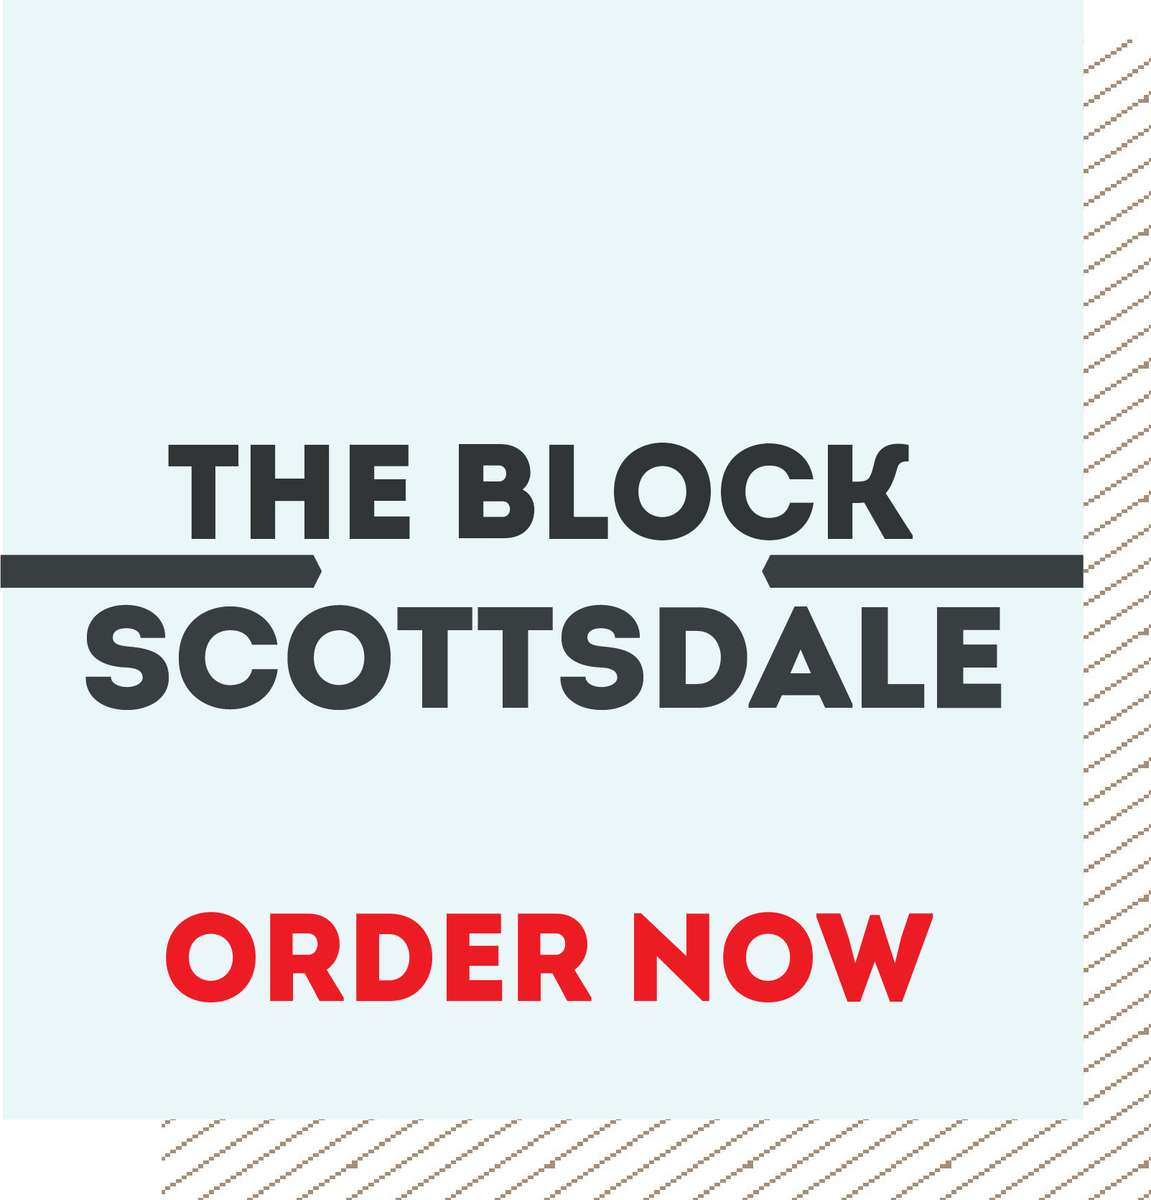 THE BLOCK. Order now.